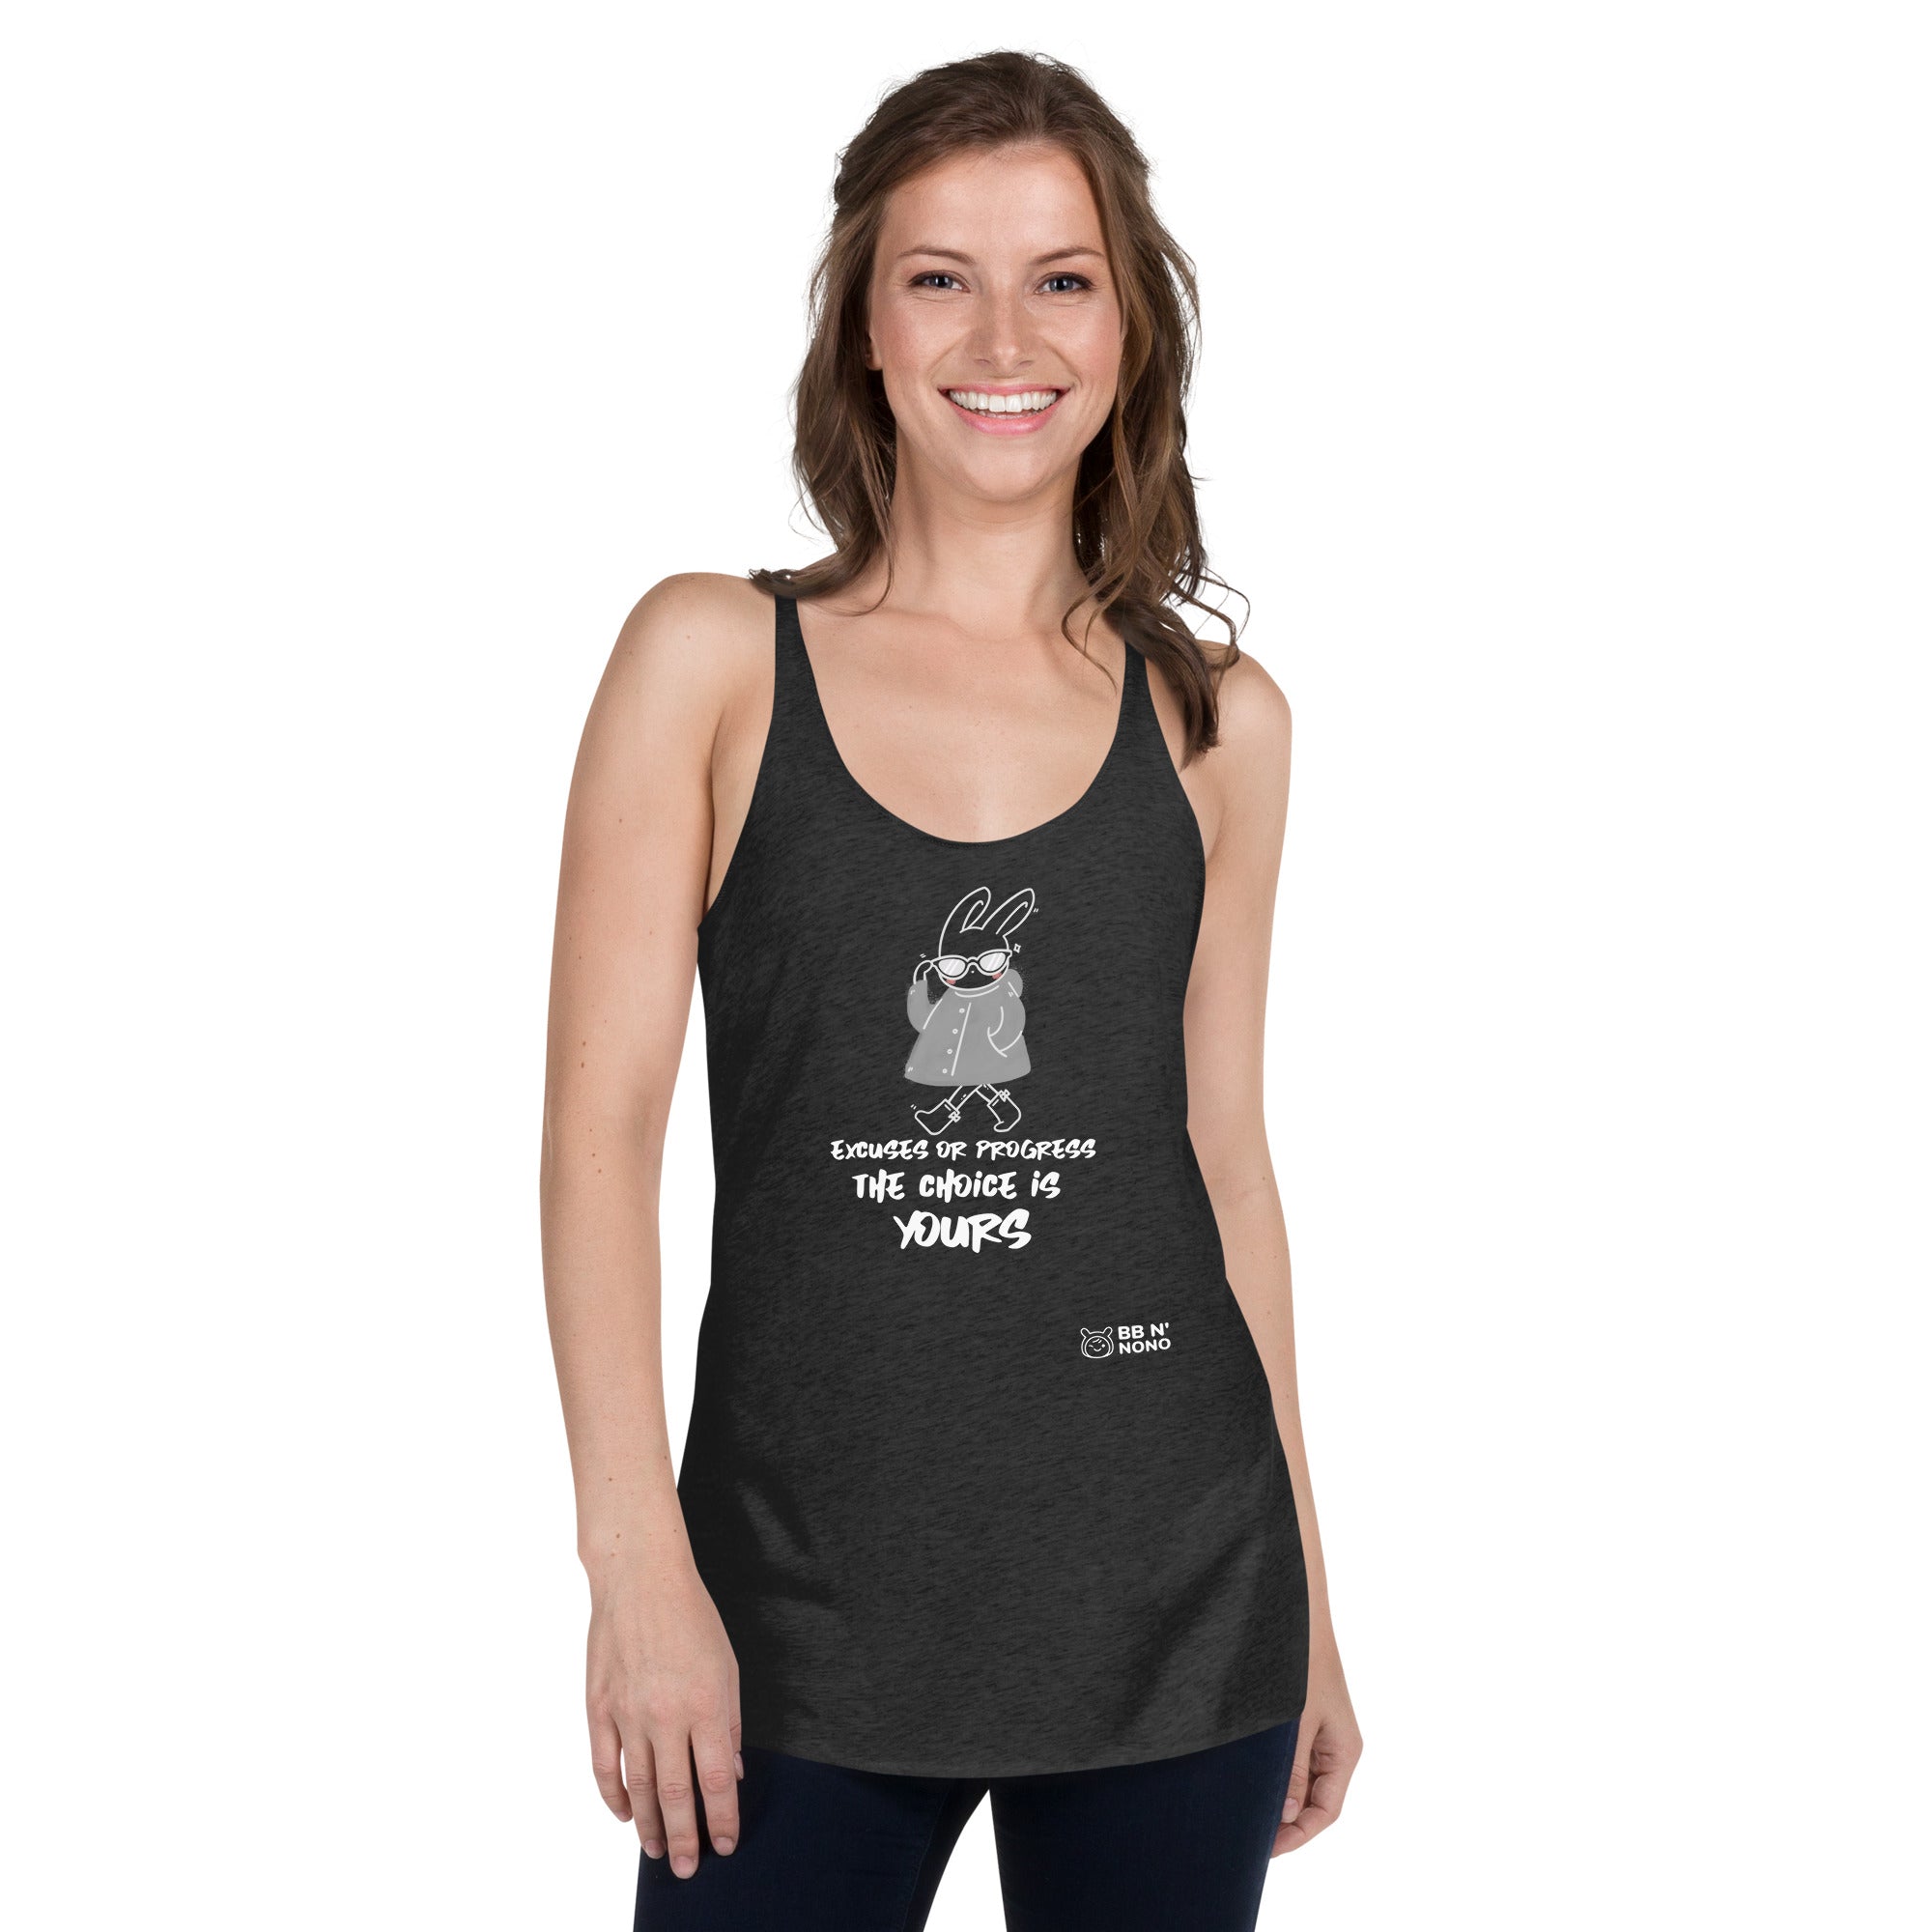 Excuses or Progress, the choice is yours - Women's Racerback Tank